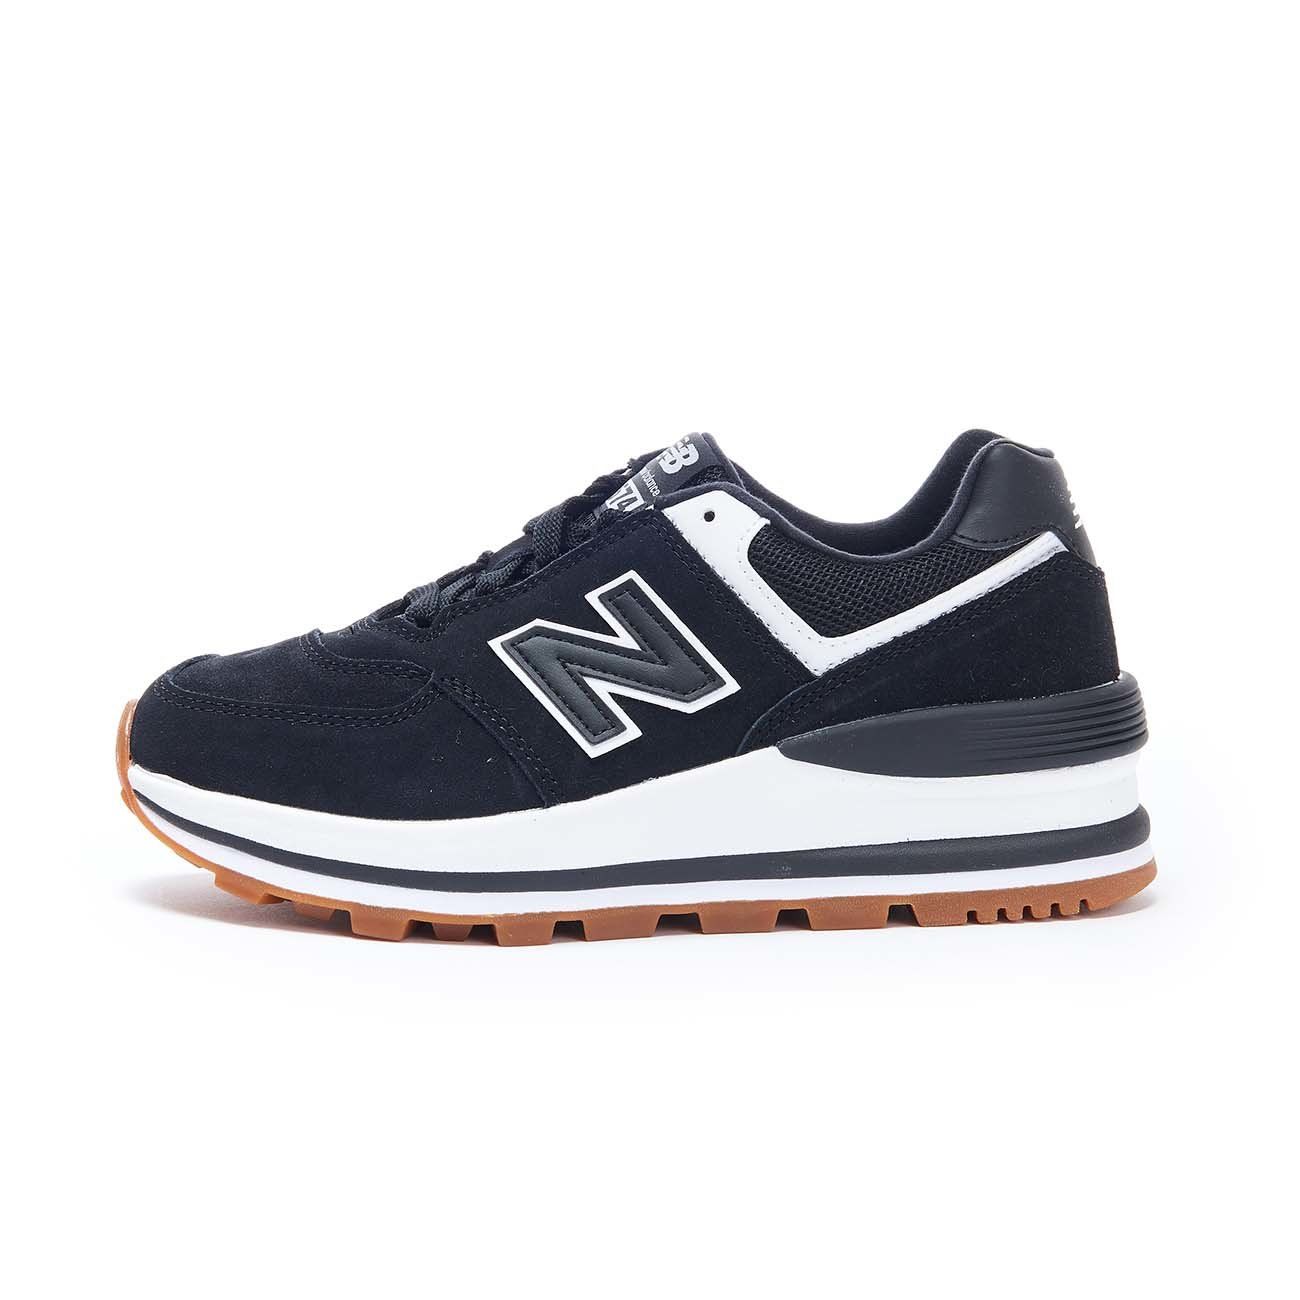 NEW BALANCE SNEAKERS 574 LIFESTYLE SUEDE Donna Black | Mascheroni ...